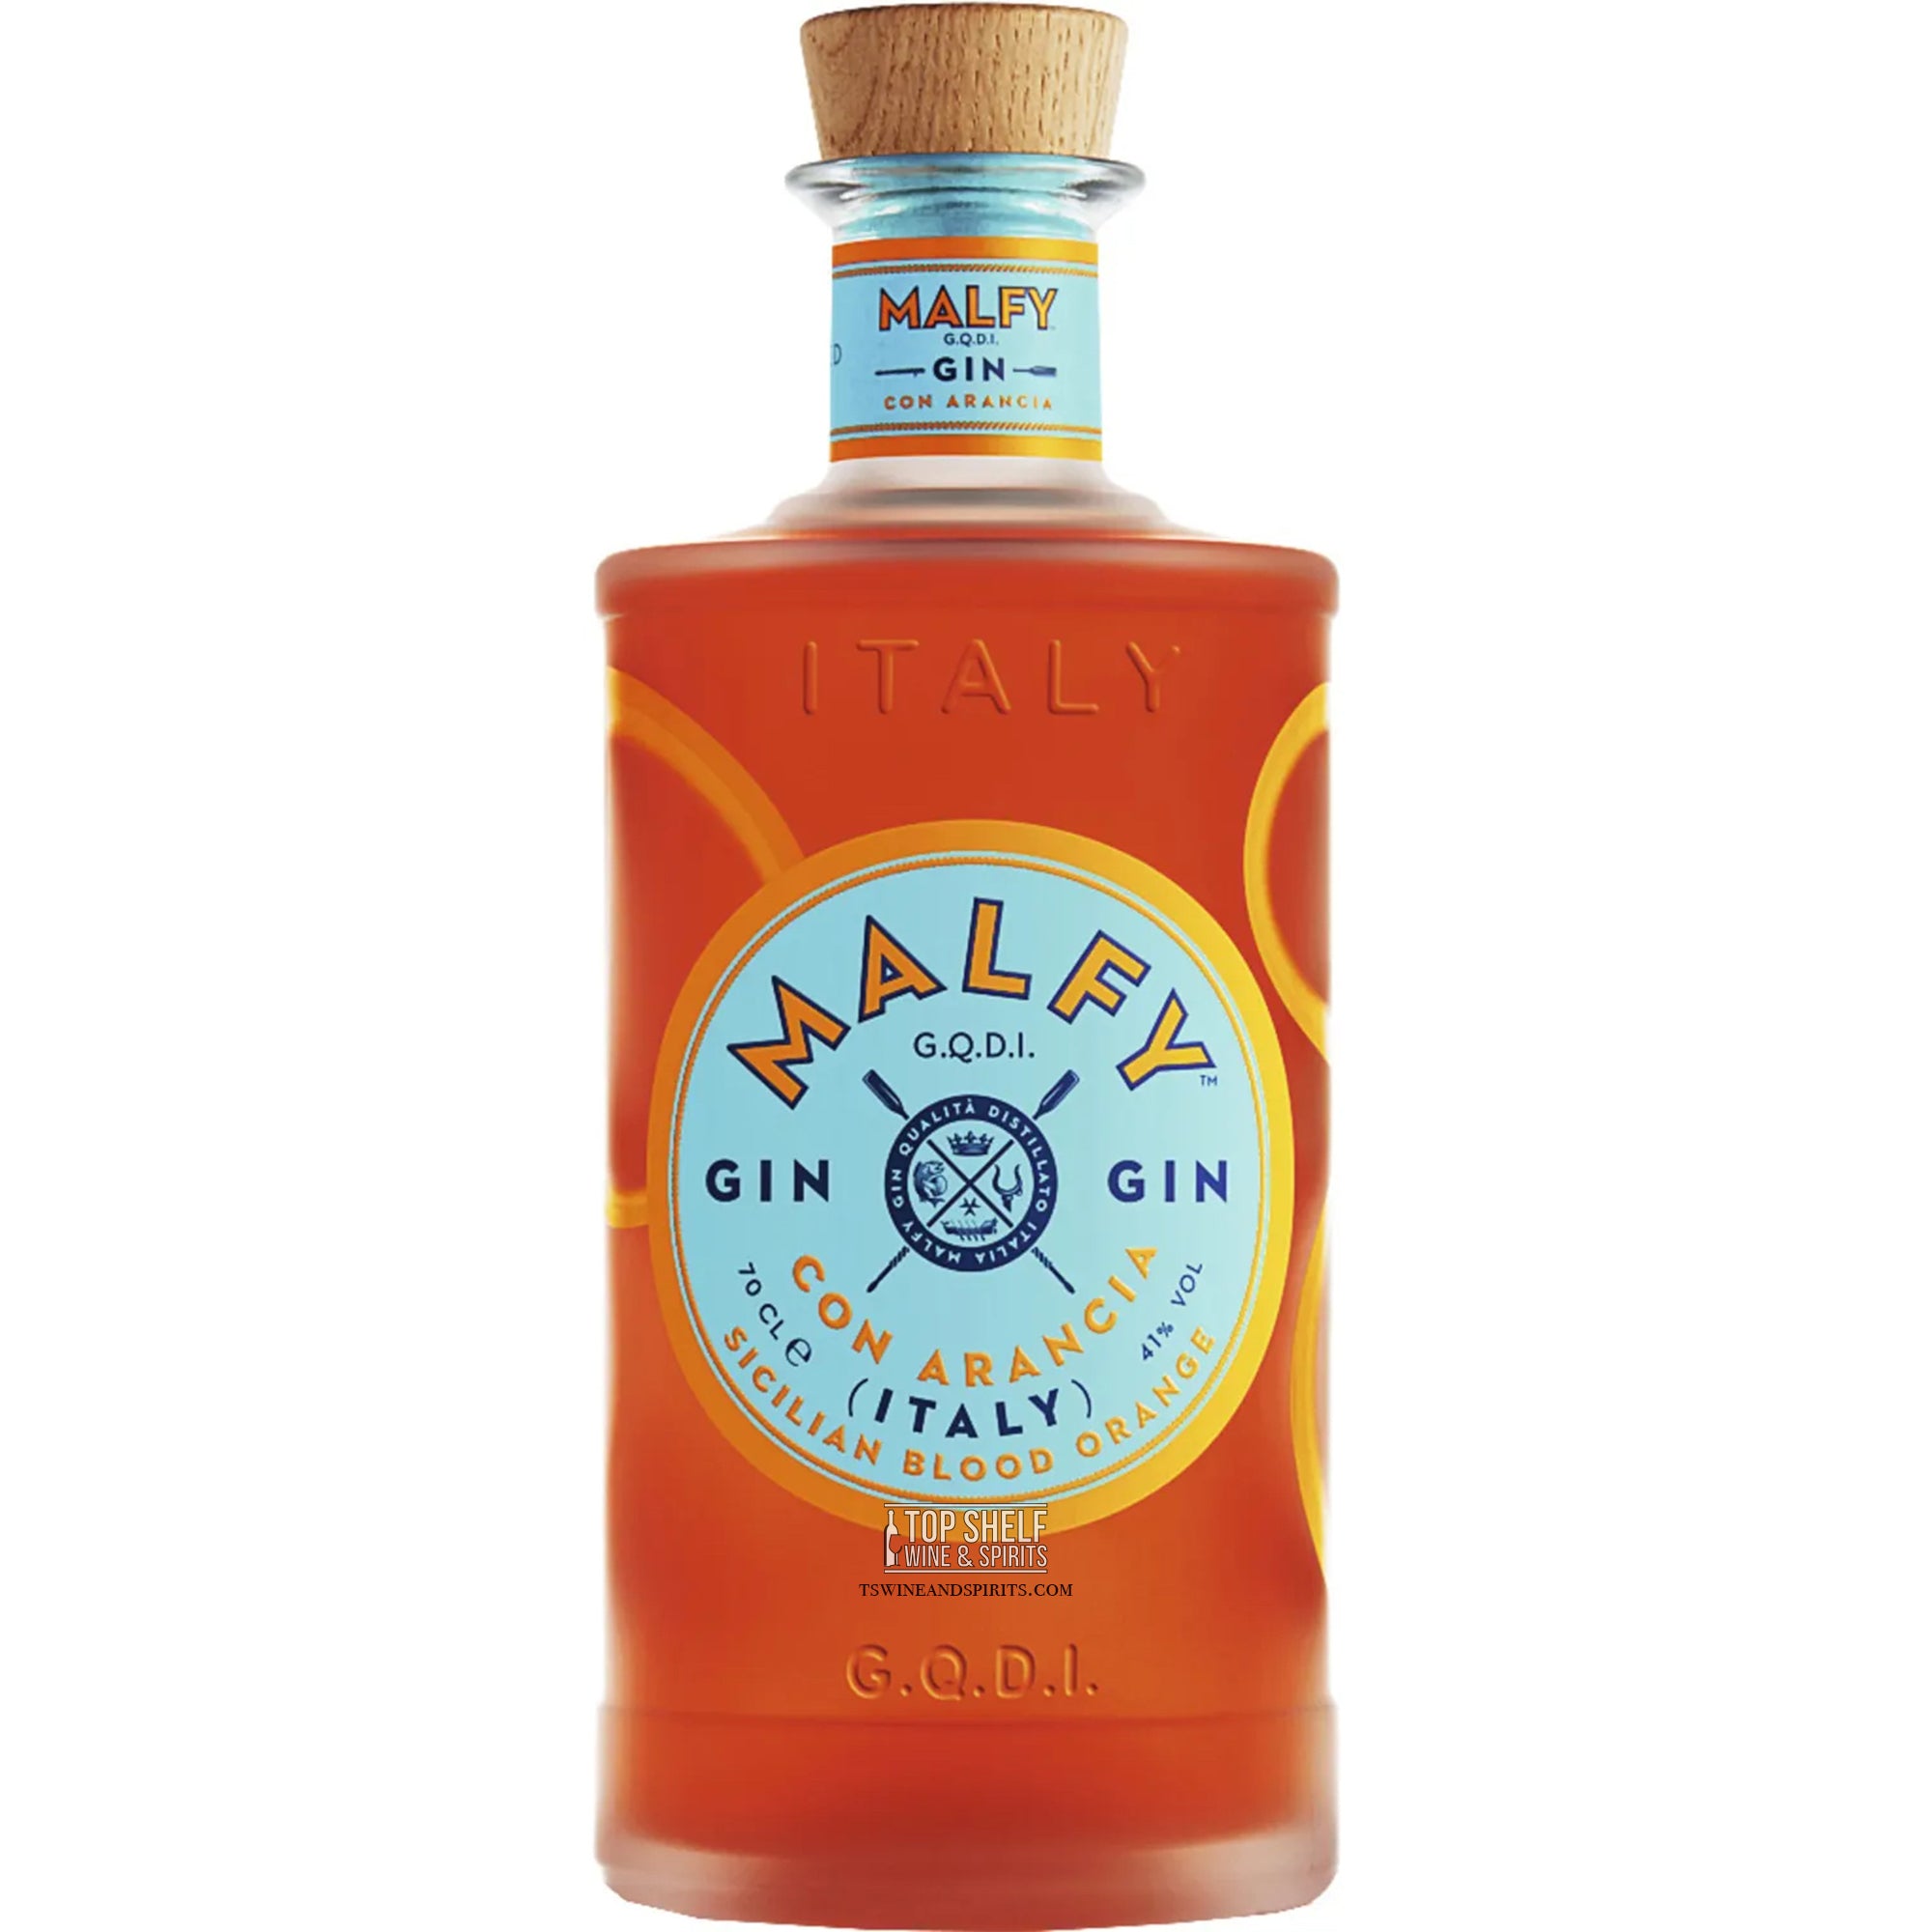 Malfy Gin Con Arancia Blood Orange | Delivery & Gifting